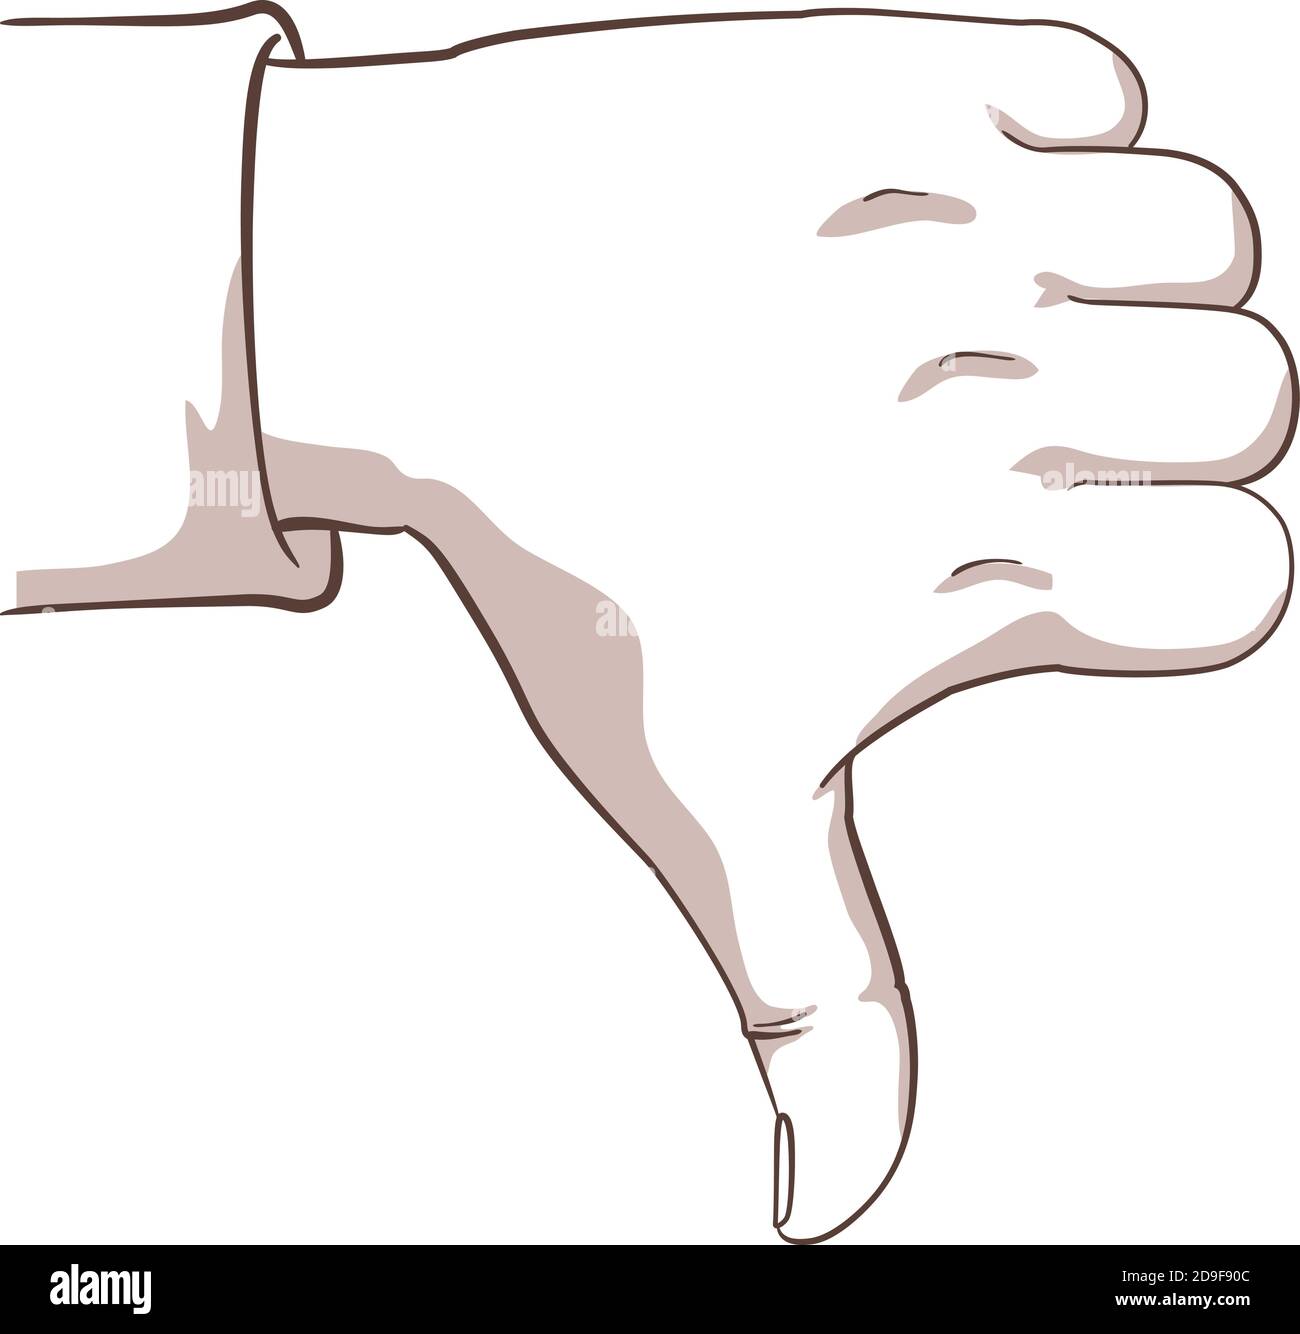 Illustration isolated on white background of a hand with the thumb down, making the gesture I Don’t Like. Stock Vector